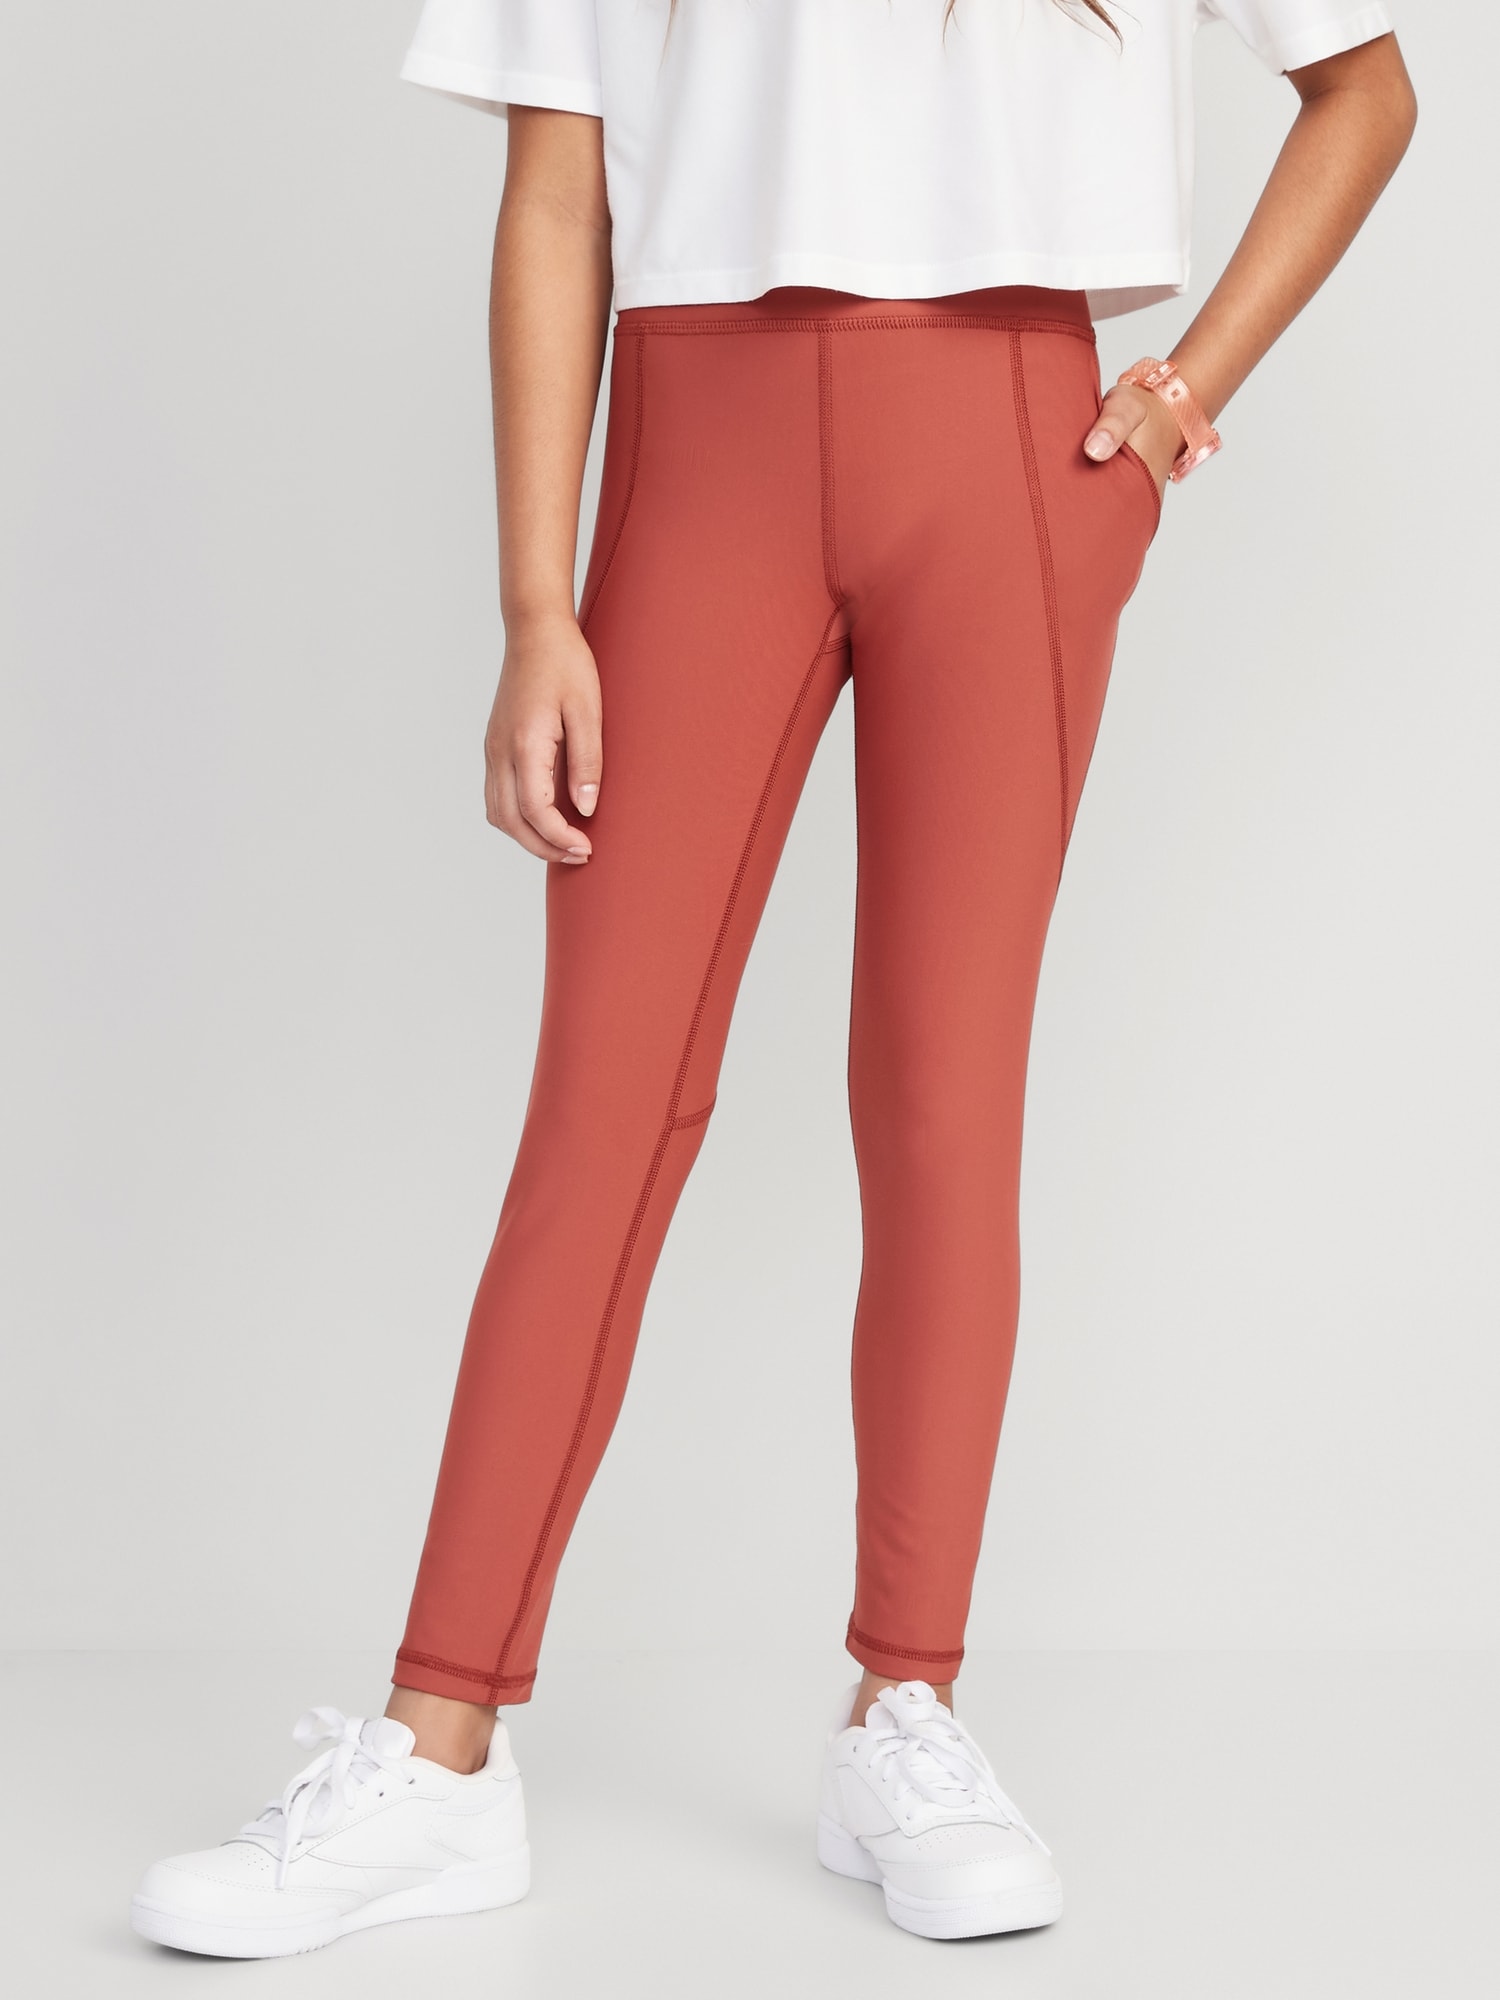 Old Navy High-Waisted PowerSoft 7/8 Leggings for Girls red. 1